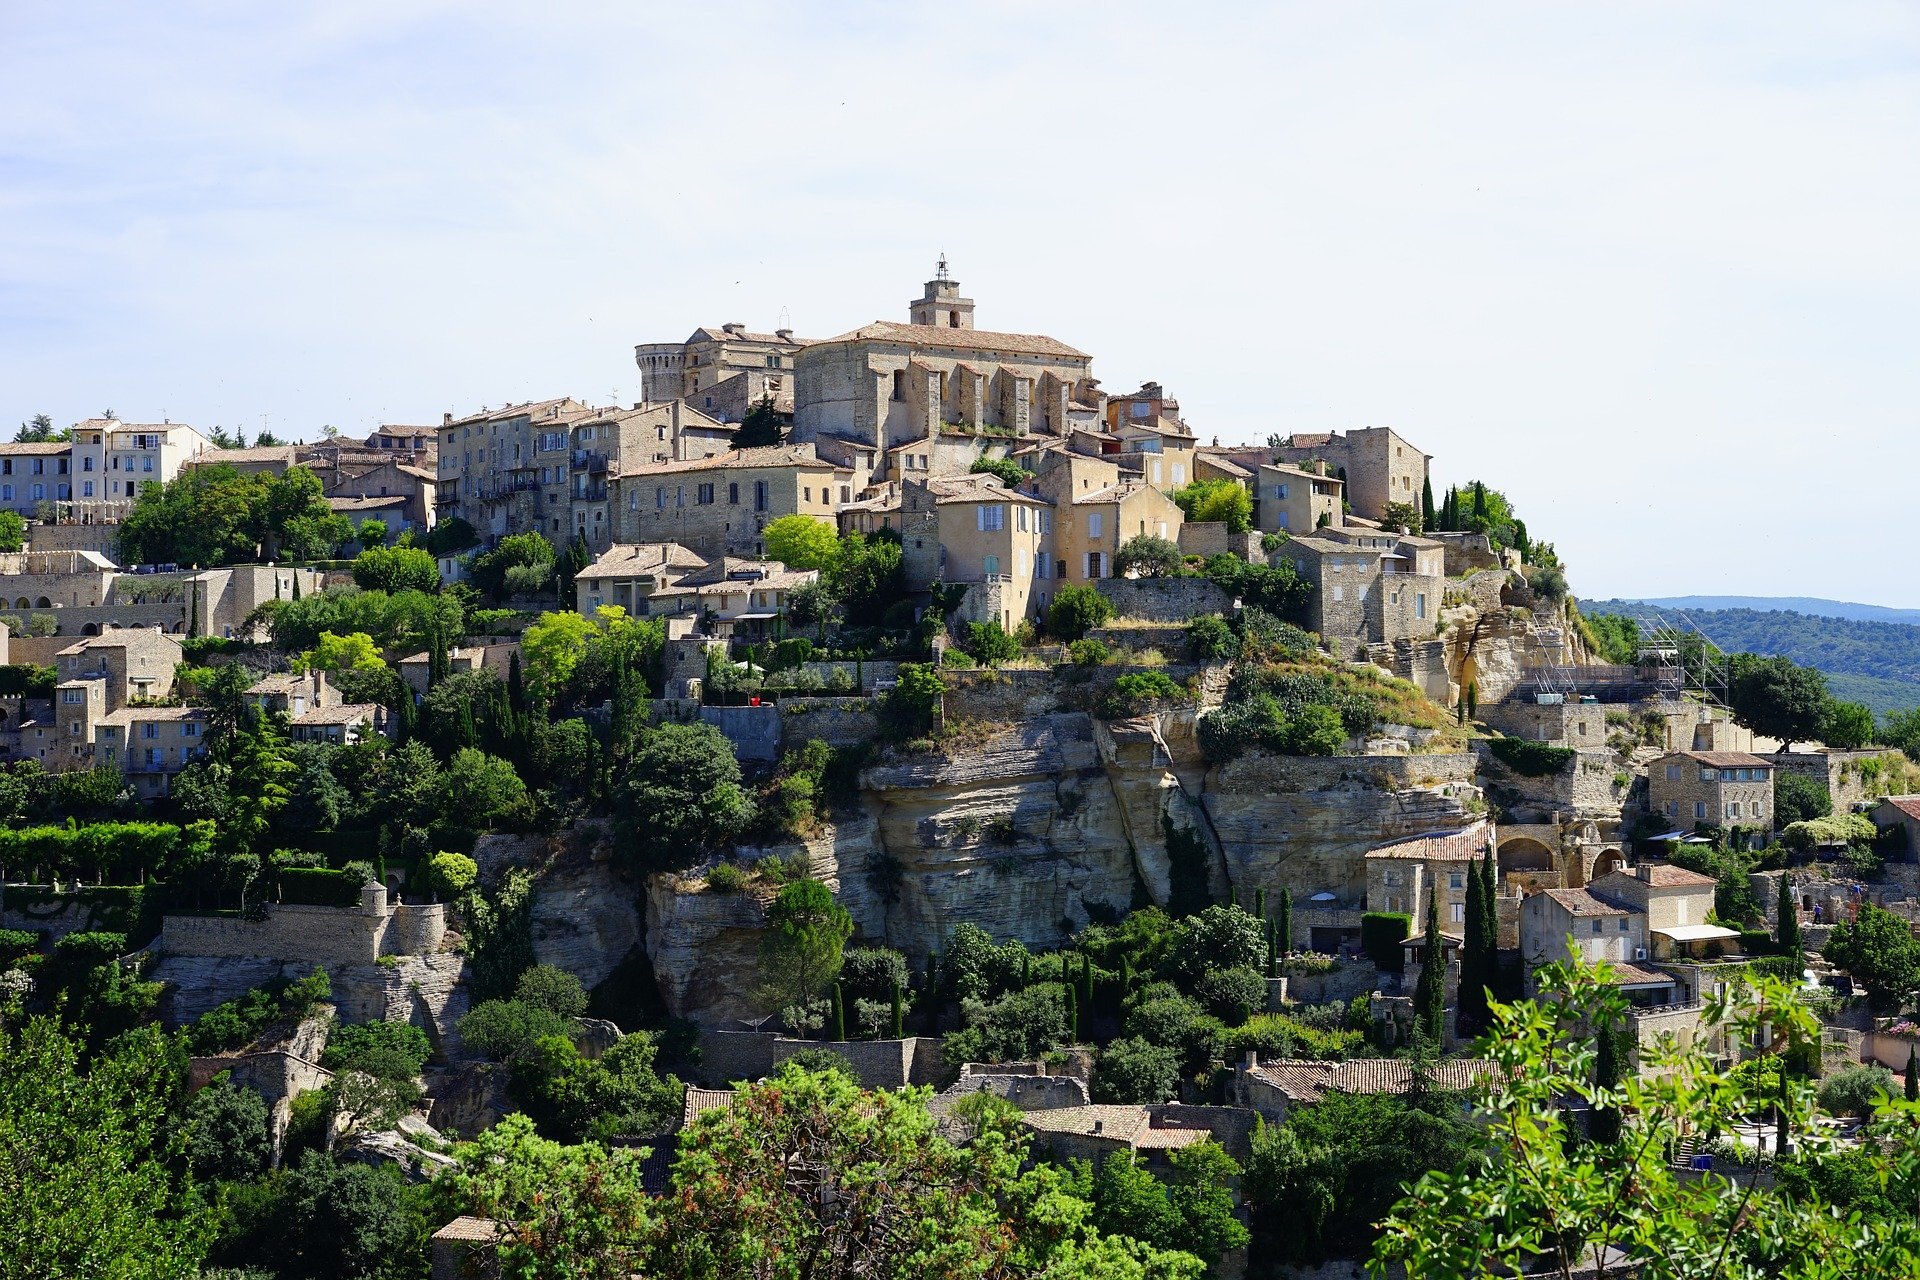 Cultural visit to Gordes in Provence, for seminars and teambuilding activities